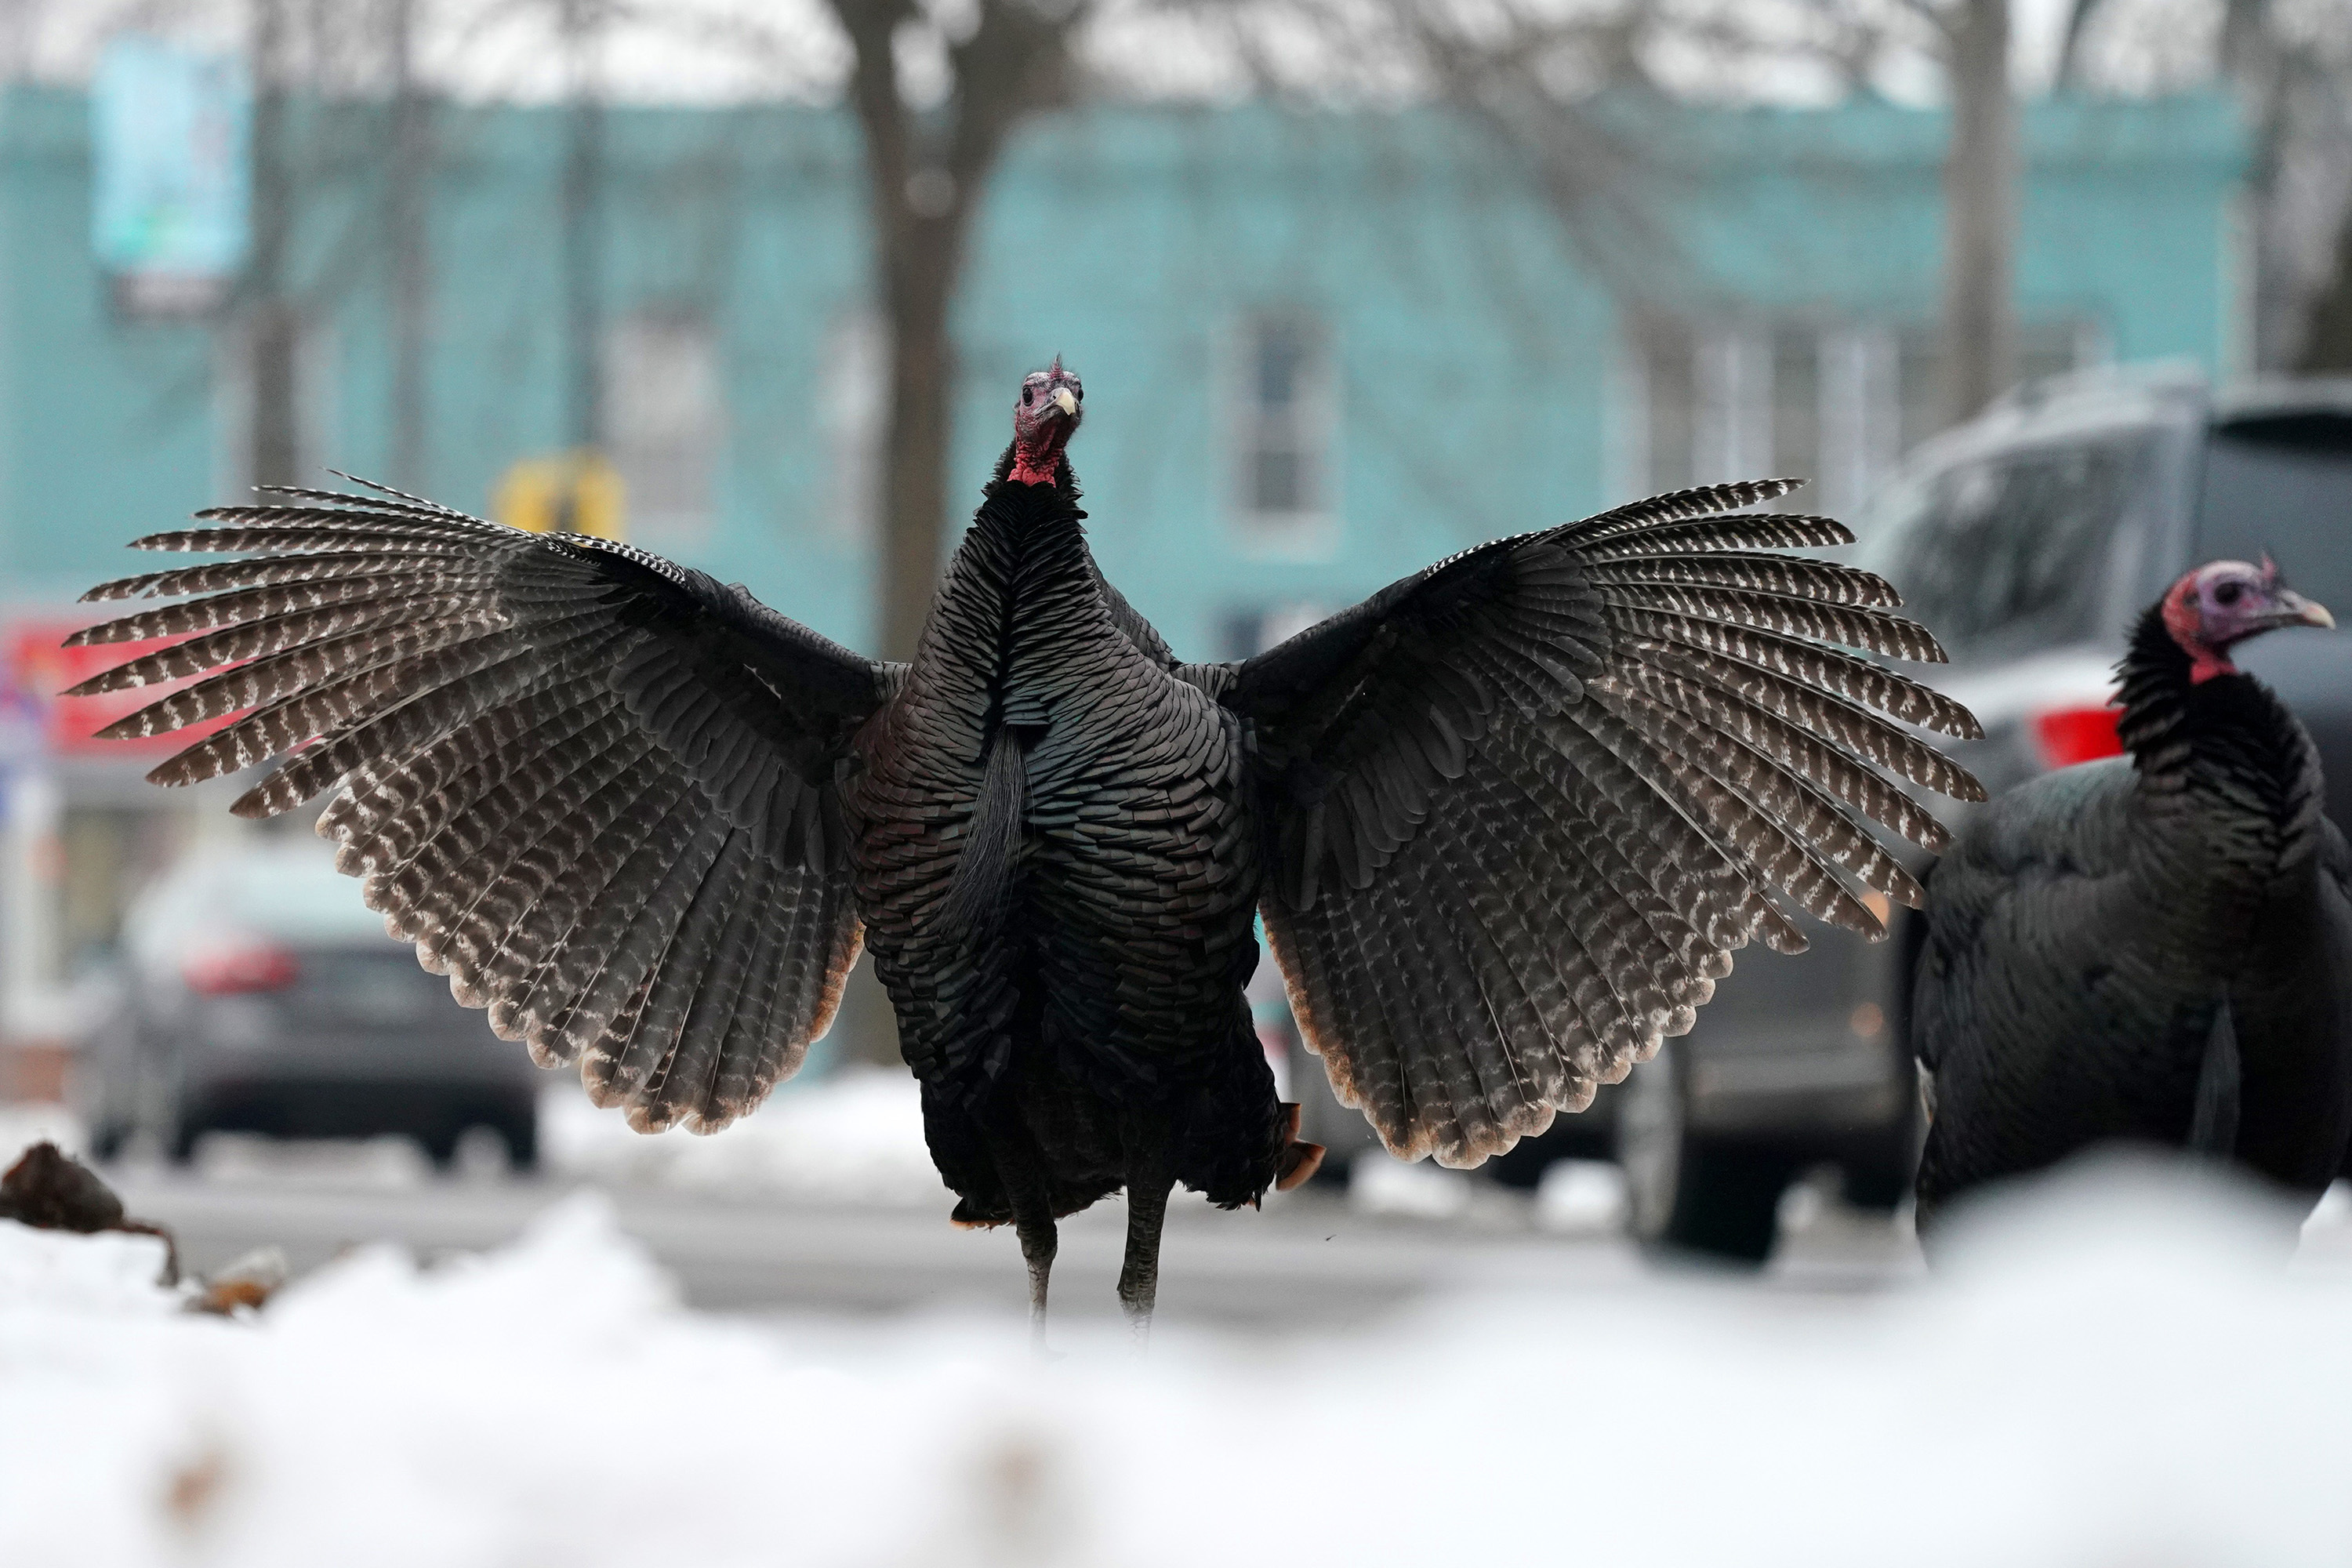 Wild turkeys can stand in for the golden rings, or gulderers.